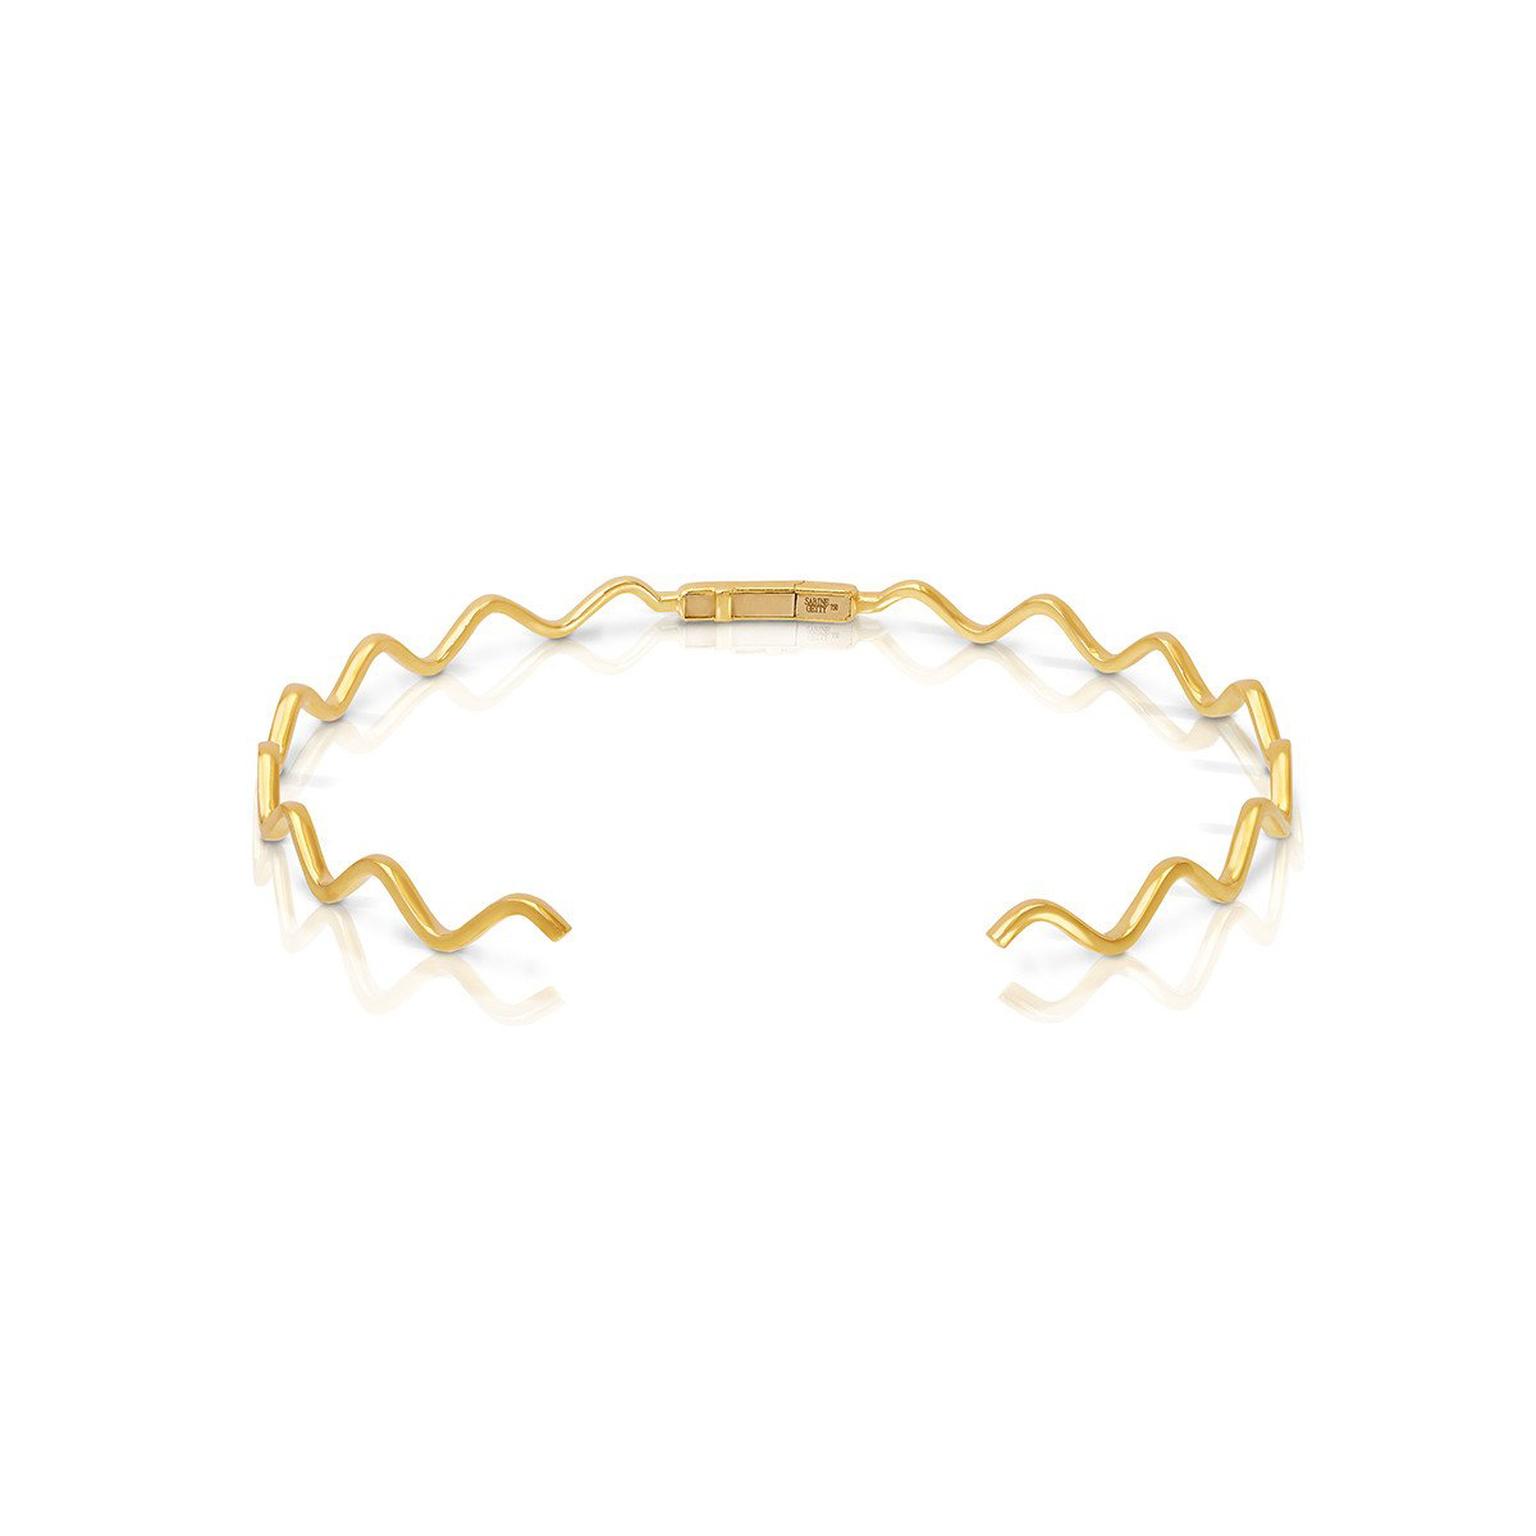 Sabine Getty Baby Memphis Wave choker in yellow gold